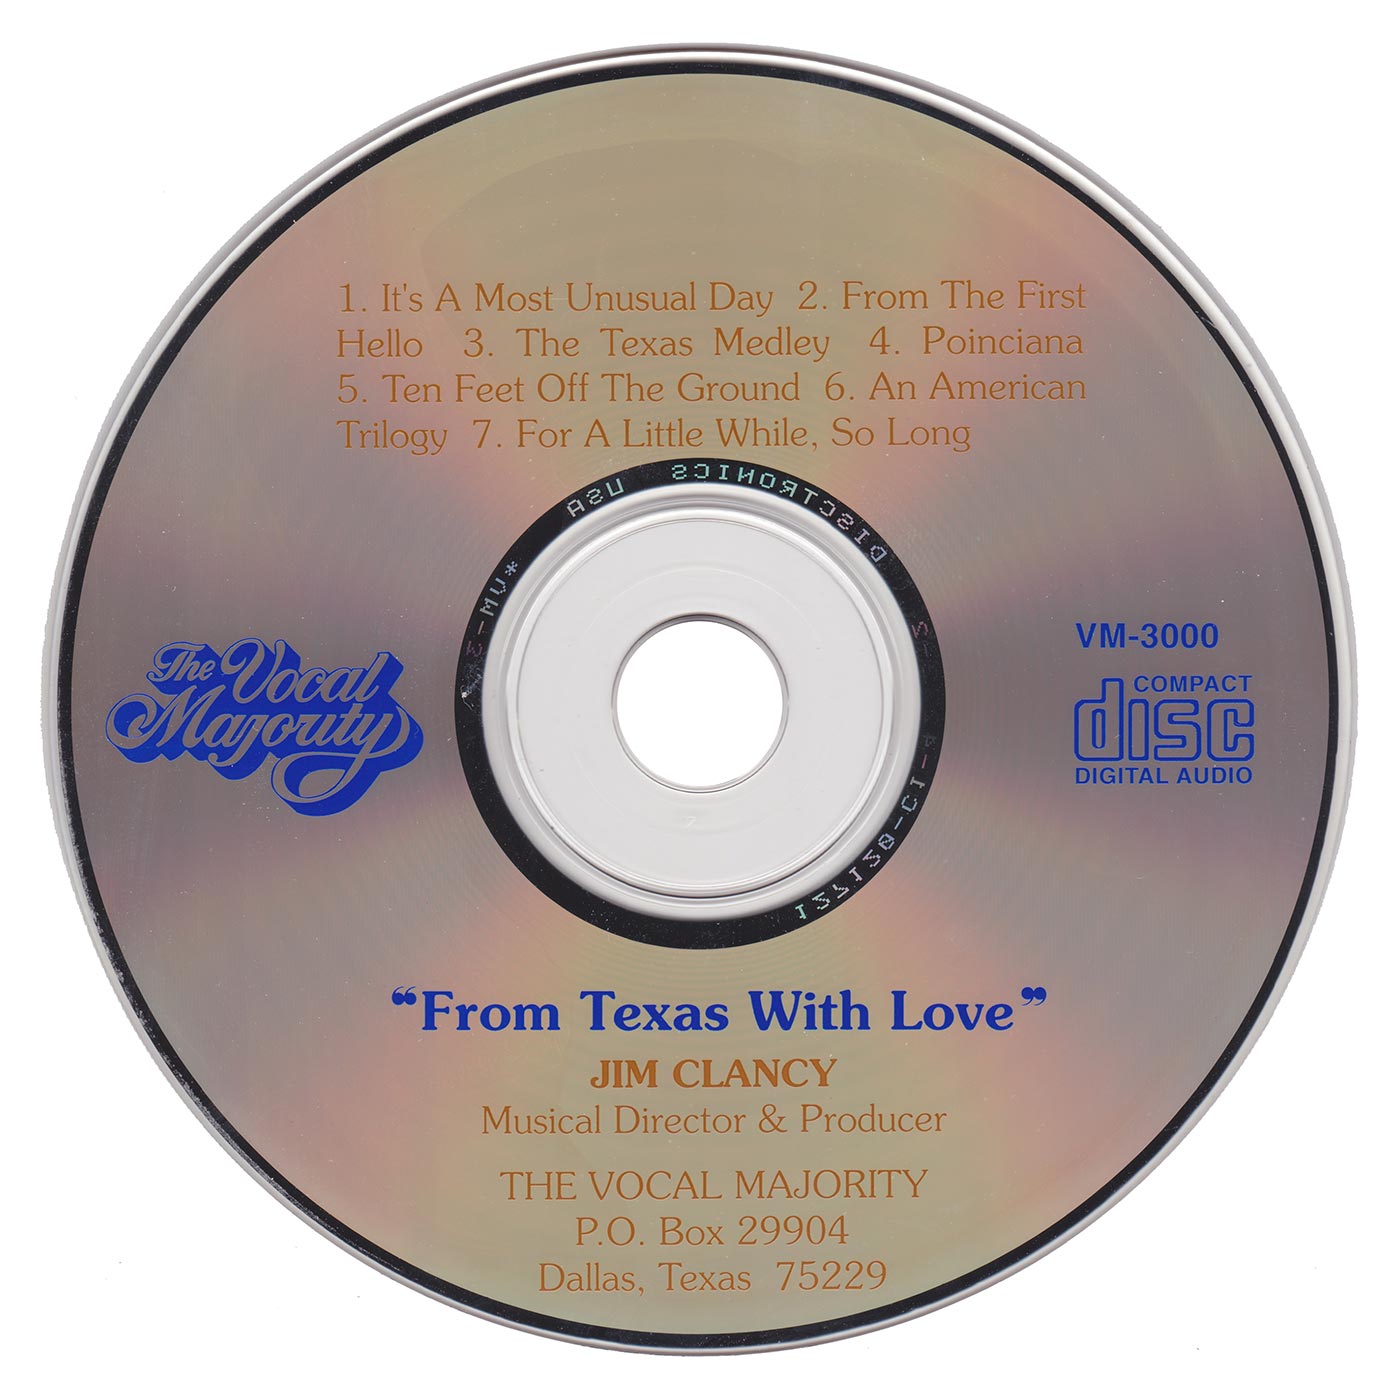 Disc Art: From Texas with Love